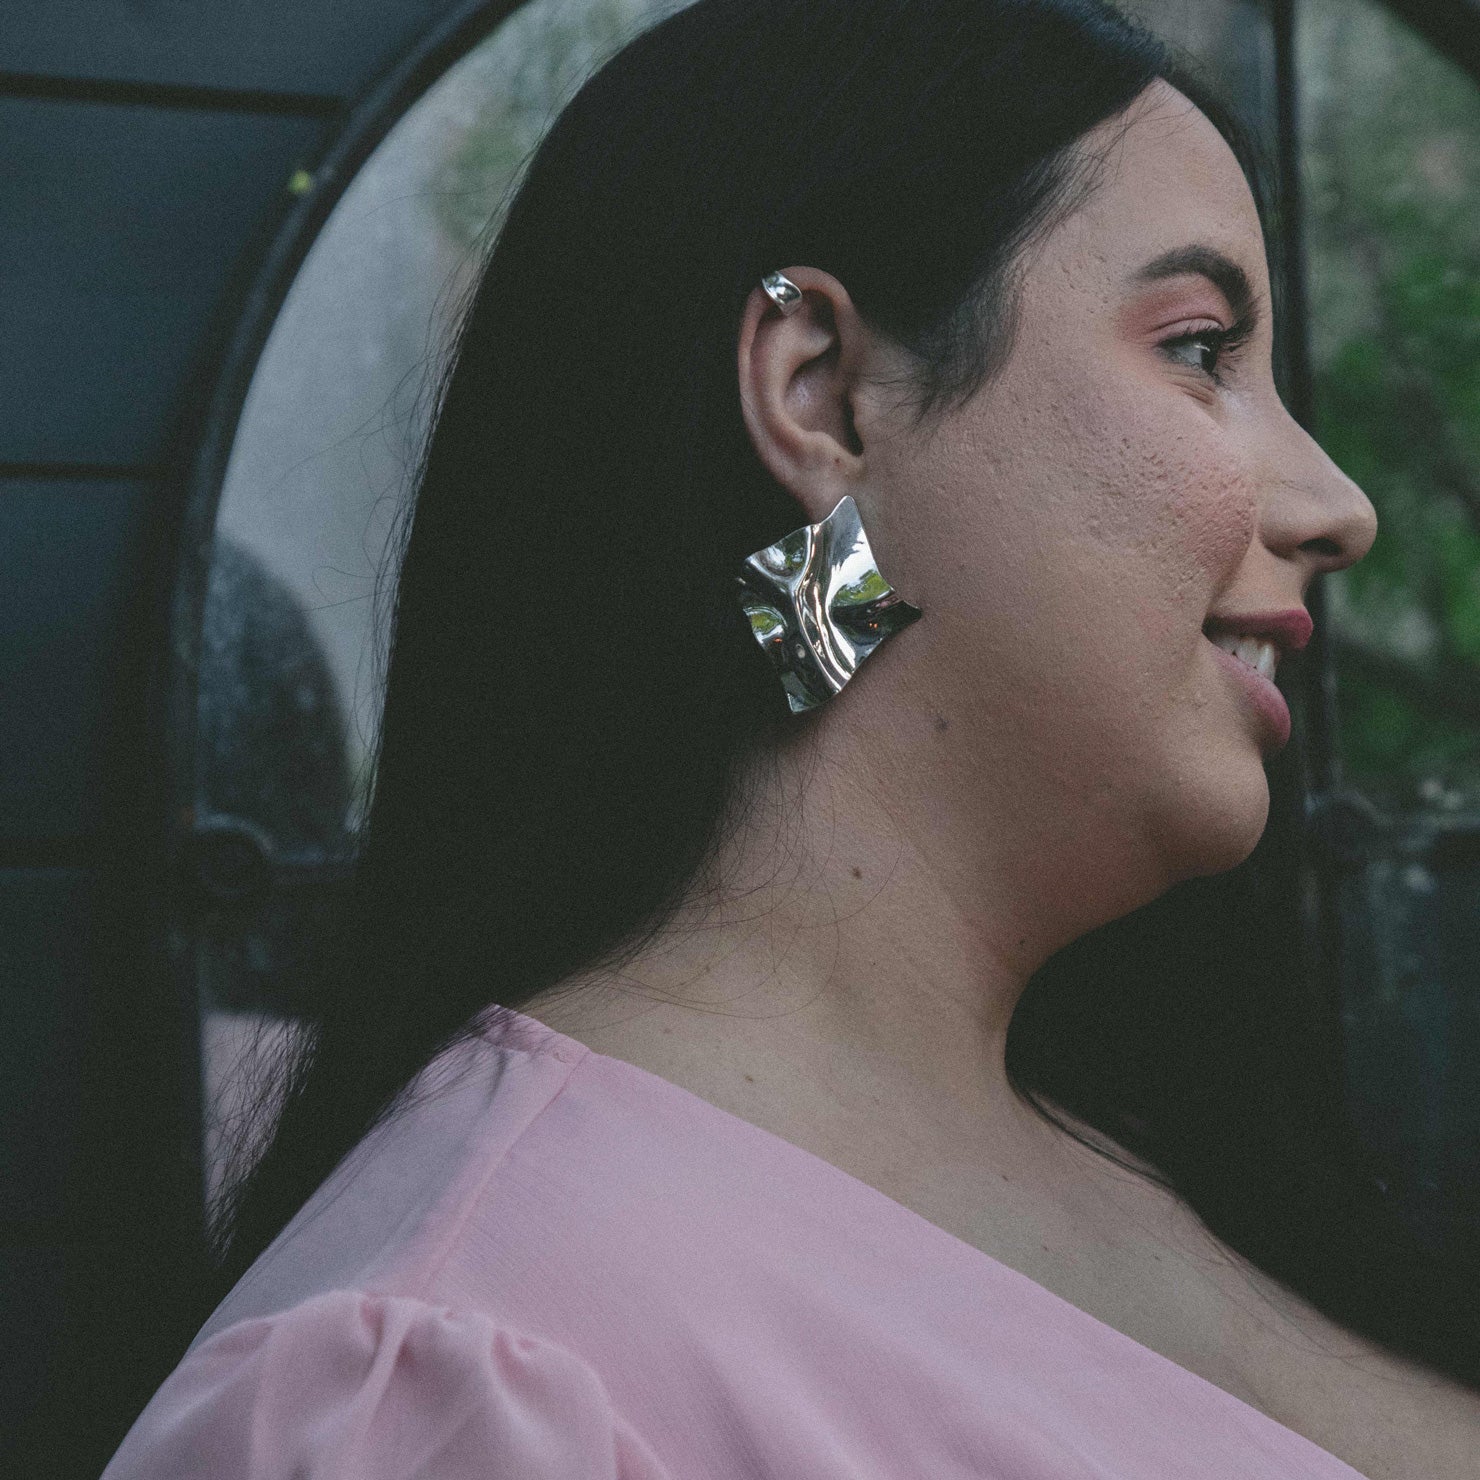 A model wearing the Aya Ear Cuff in Gold, made with 925 Sterling Silver for a timeless, luxurious style. Slip on these classy clip-on earrings to instantly elevate your look.